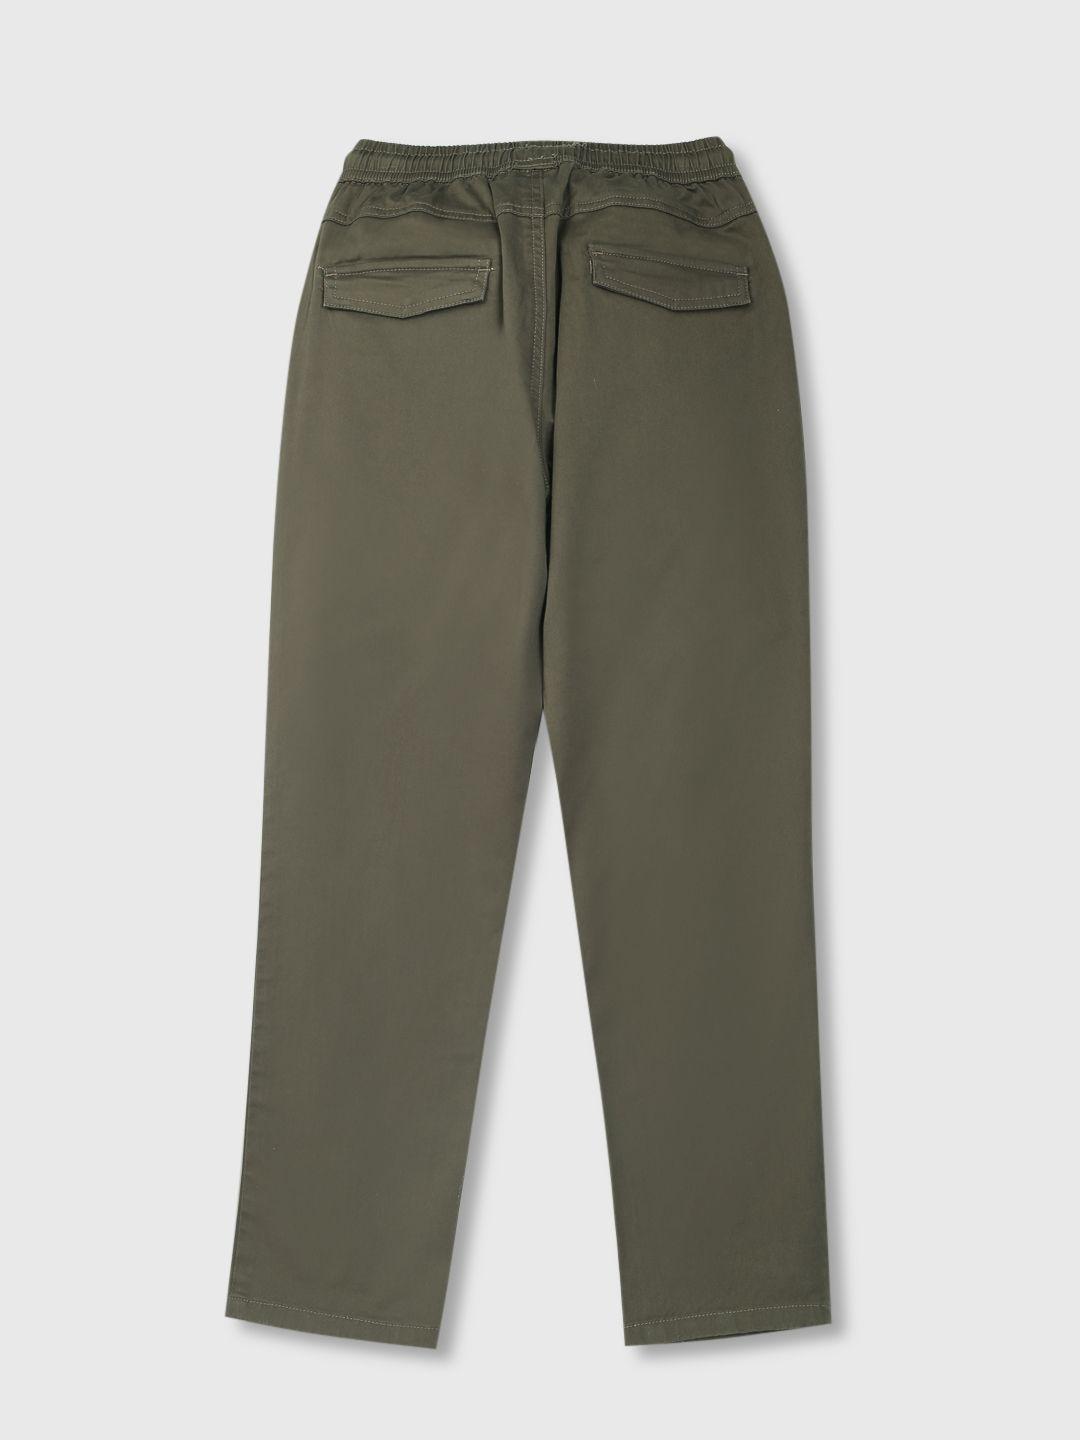 palm tree boys olive green joggers trousers